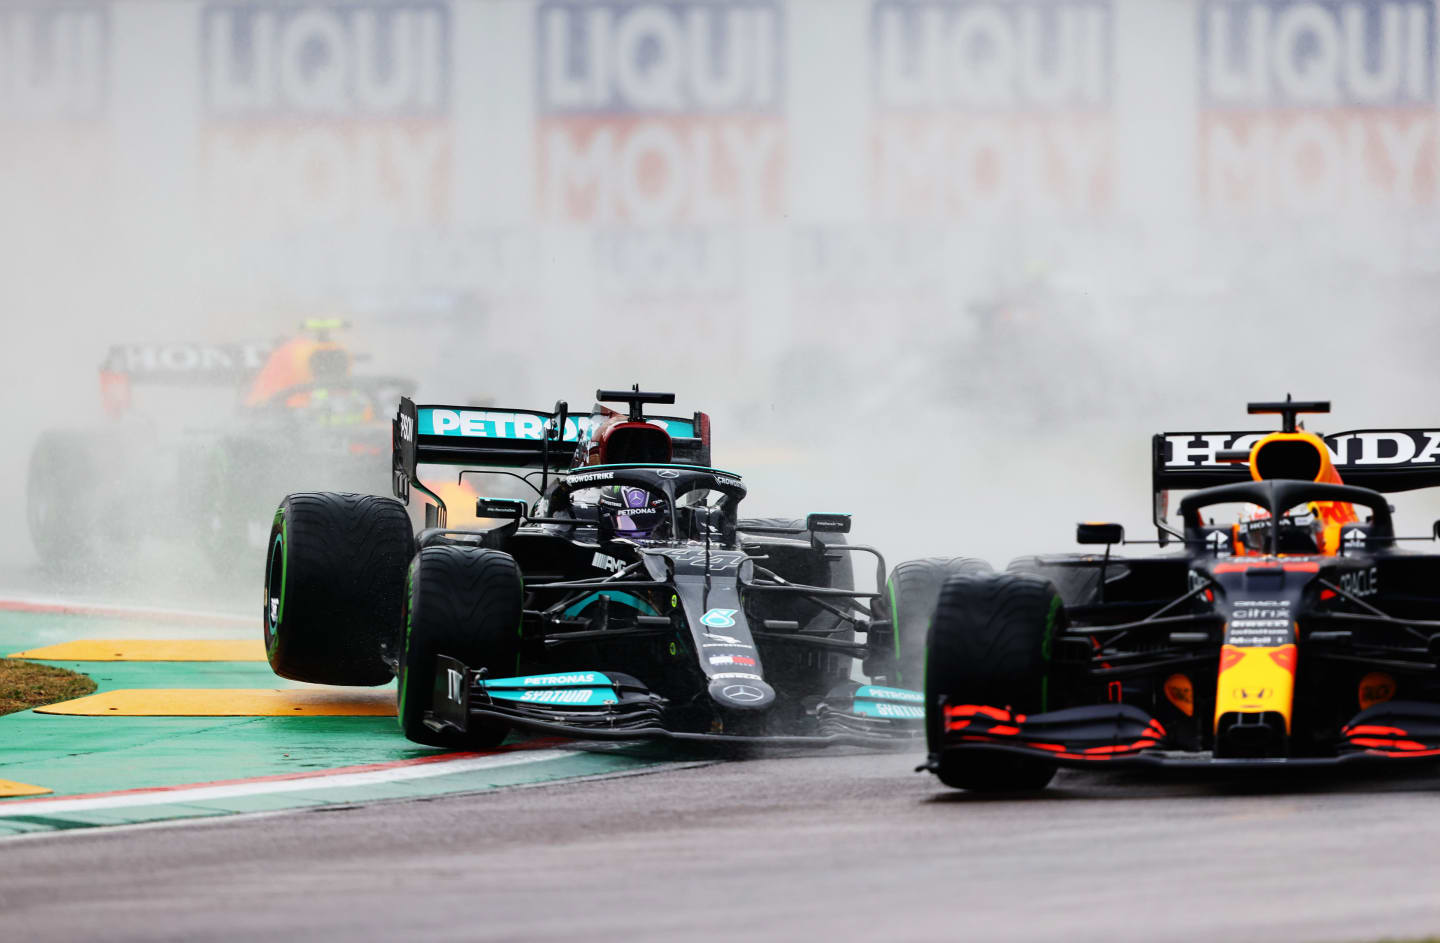 IMOLA, ITALY - APRIL 18: Lewis Hamilton of Great Britain driving the (44) Mercedes AMG Petronas F1 Team Mercedes W12 drives off a raised kerb behind Max Verstappen of the Netherlands driving the (33) Red Bull Racing RB16B Honda during the F1 Grand Prix of Emilia Romagna at Autodromo Enzo e Dino Ferrari on April 18, 2021 in Imola, Italy. (Photo by Bryn Lennon/Getty Images)